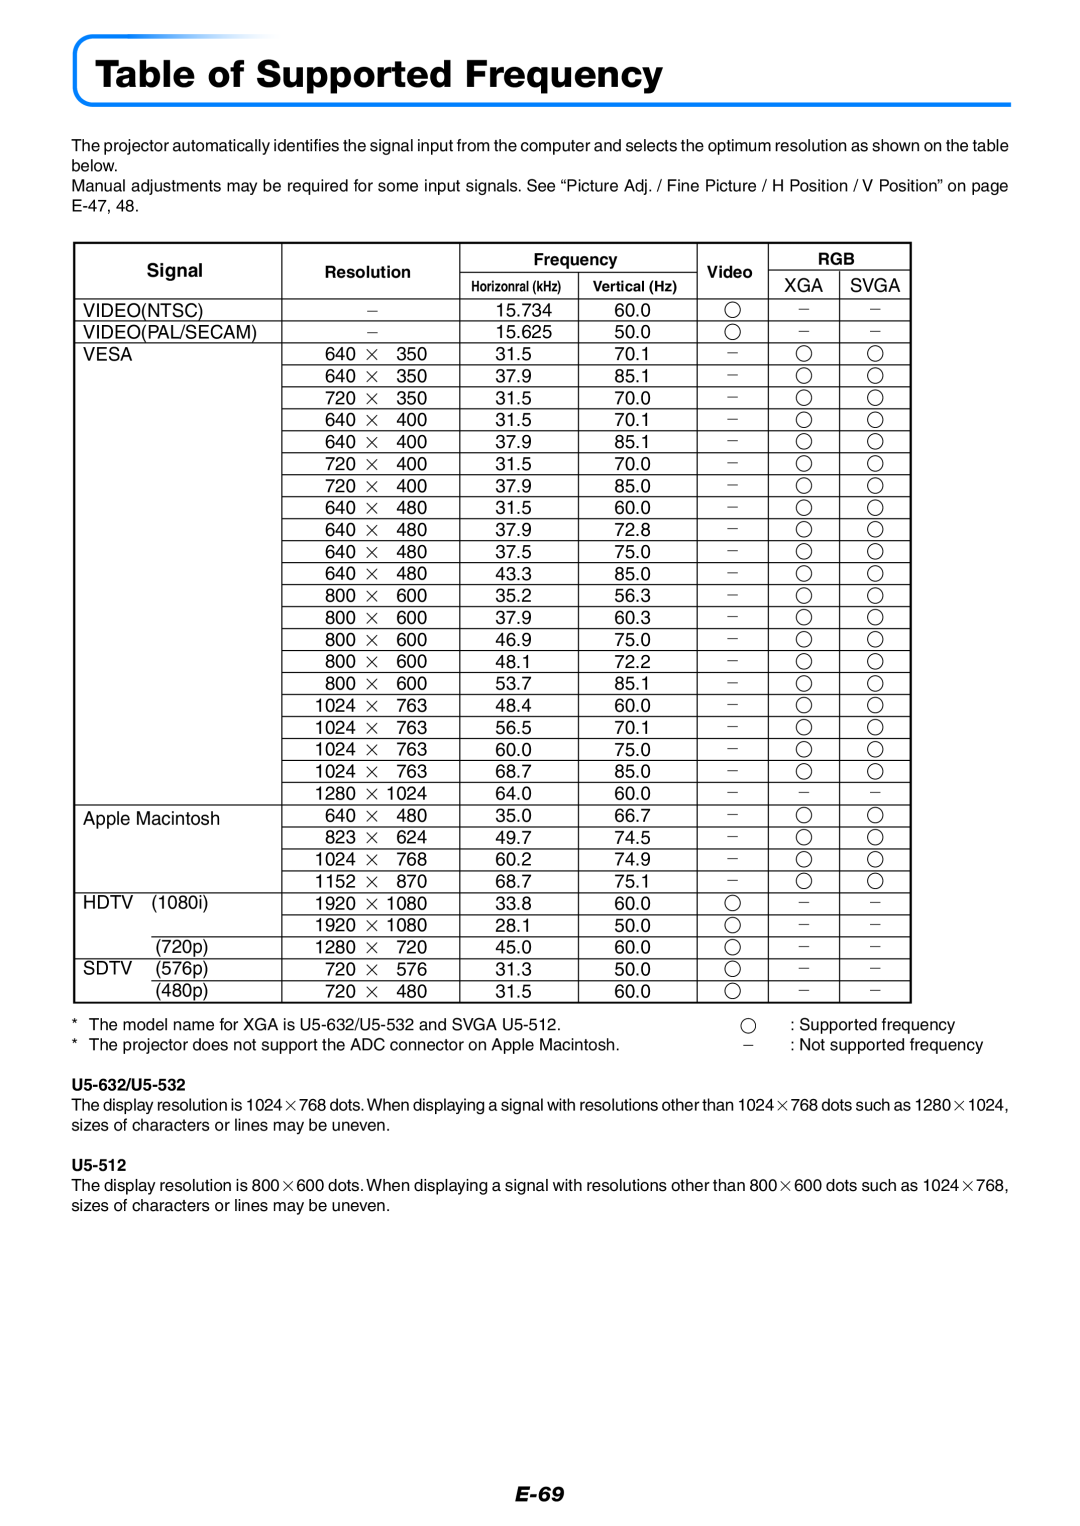 PLUS Vision U5-532, U5-632, U5-512 user manual Table of Supported Frequency, E-69, Signal 